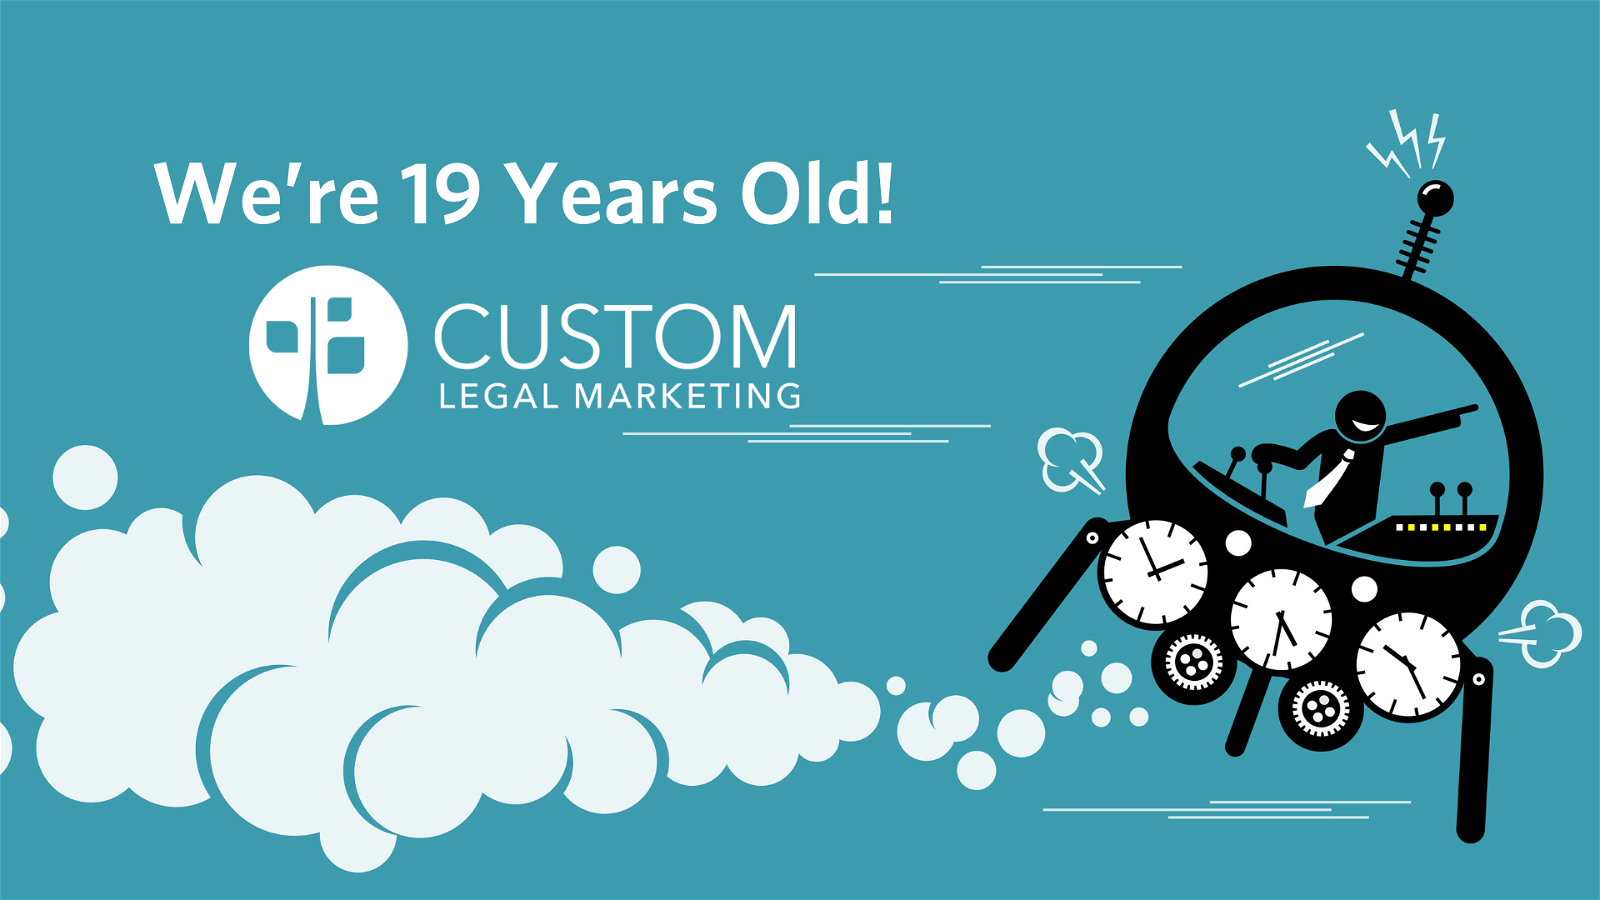 Custom Legal Marketing Celebrates 19 Years Which Makes Us Older than Many Tech Companies